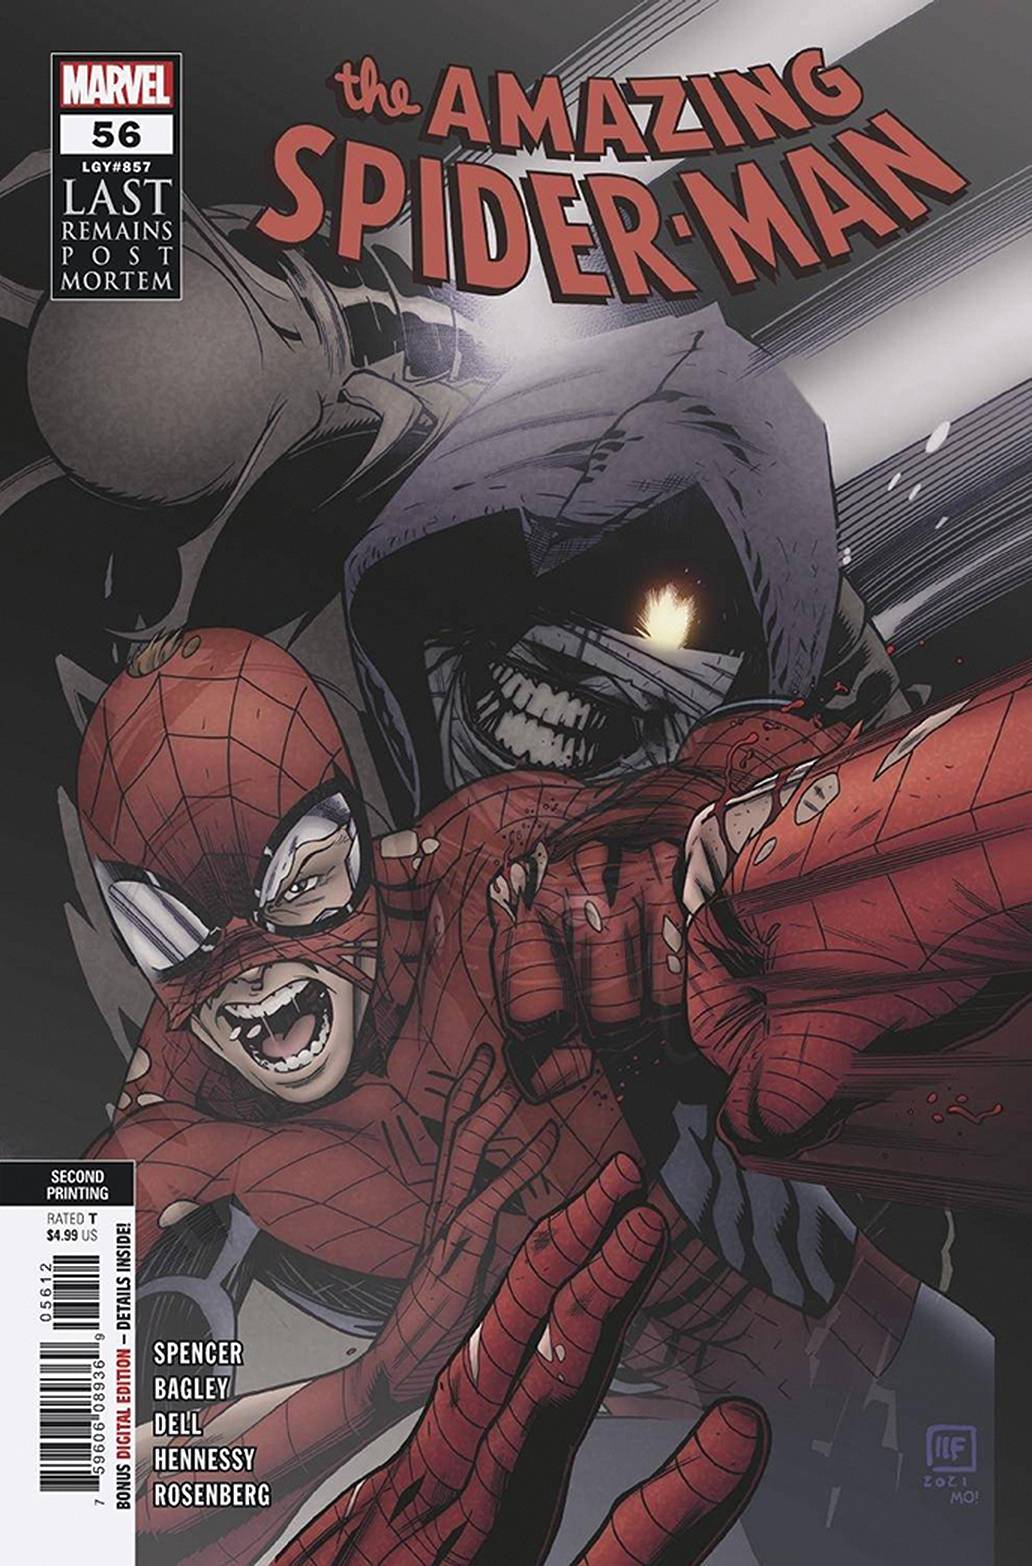 DF AMAZING SPIDERMAN #56 SPENCER SGN